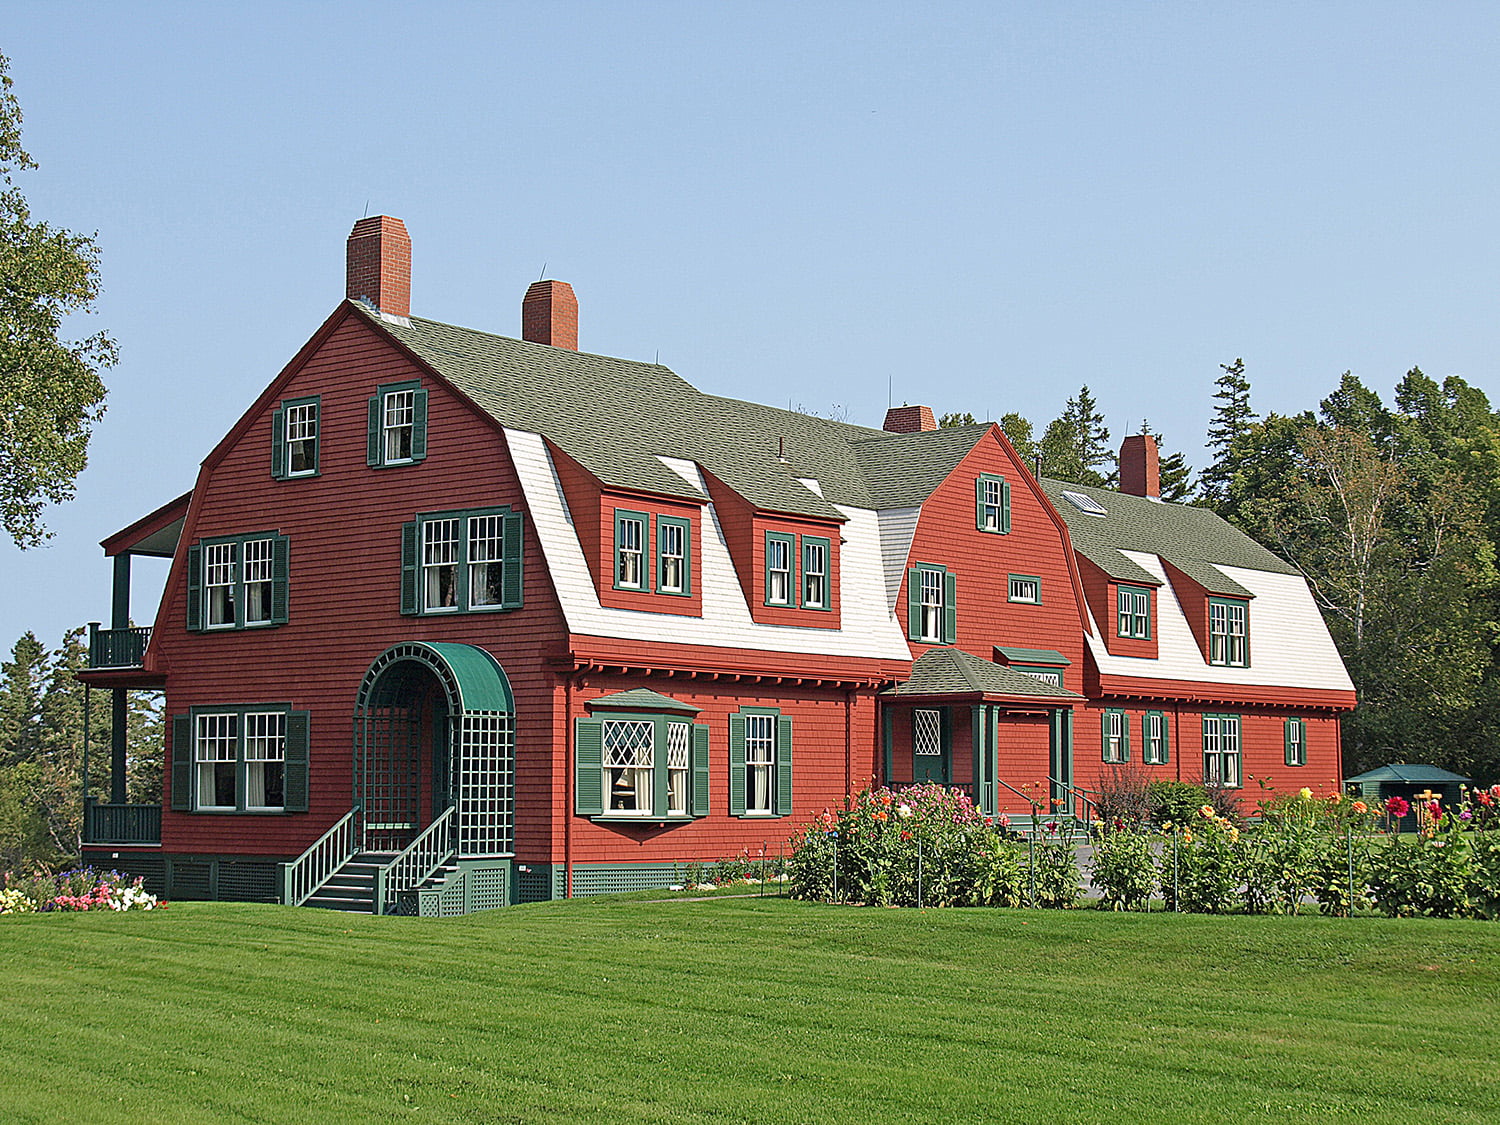 A long, red-sided building with a green roof, the cottage cherished by Franklin D. Roosevelt.